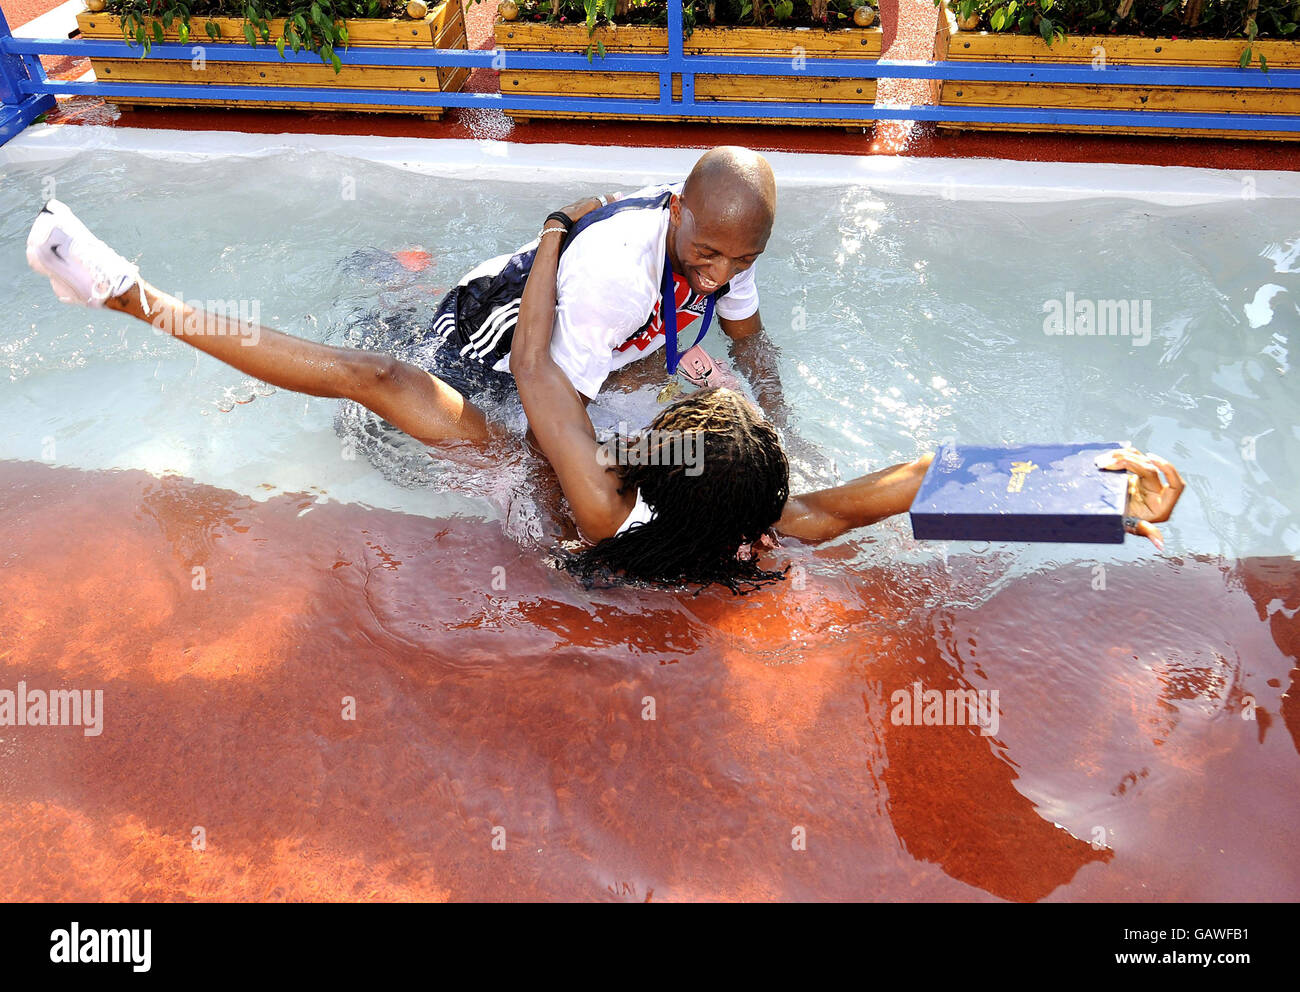 The GB Men's Athletics team celebrate their victory in the Event at the Spar European Cup at as they throw their captain Marlon Devonish into the Water Jump where he is joined by Natasha Danvers the Womens Team Captain at Annecy, France. Stock Photo